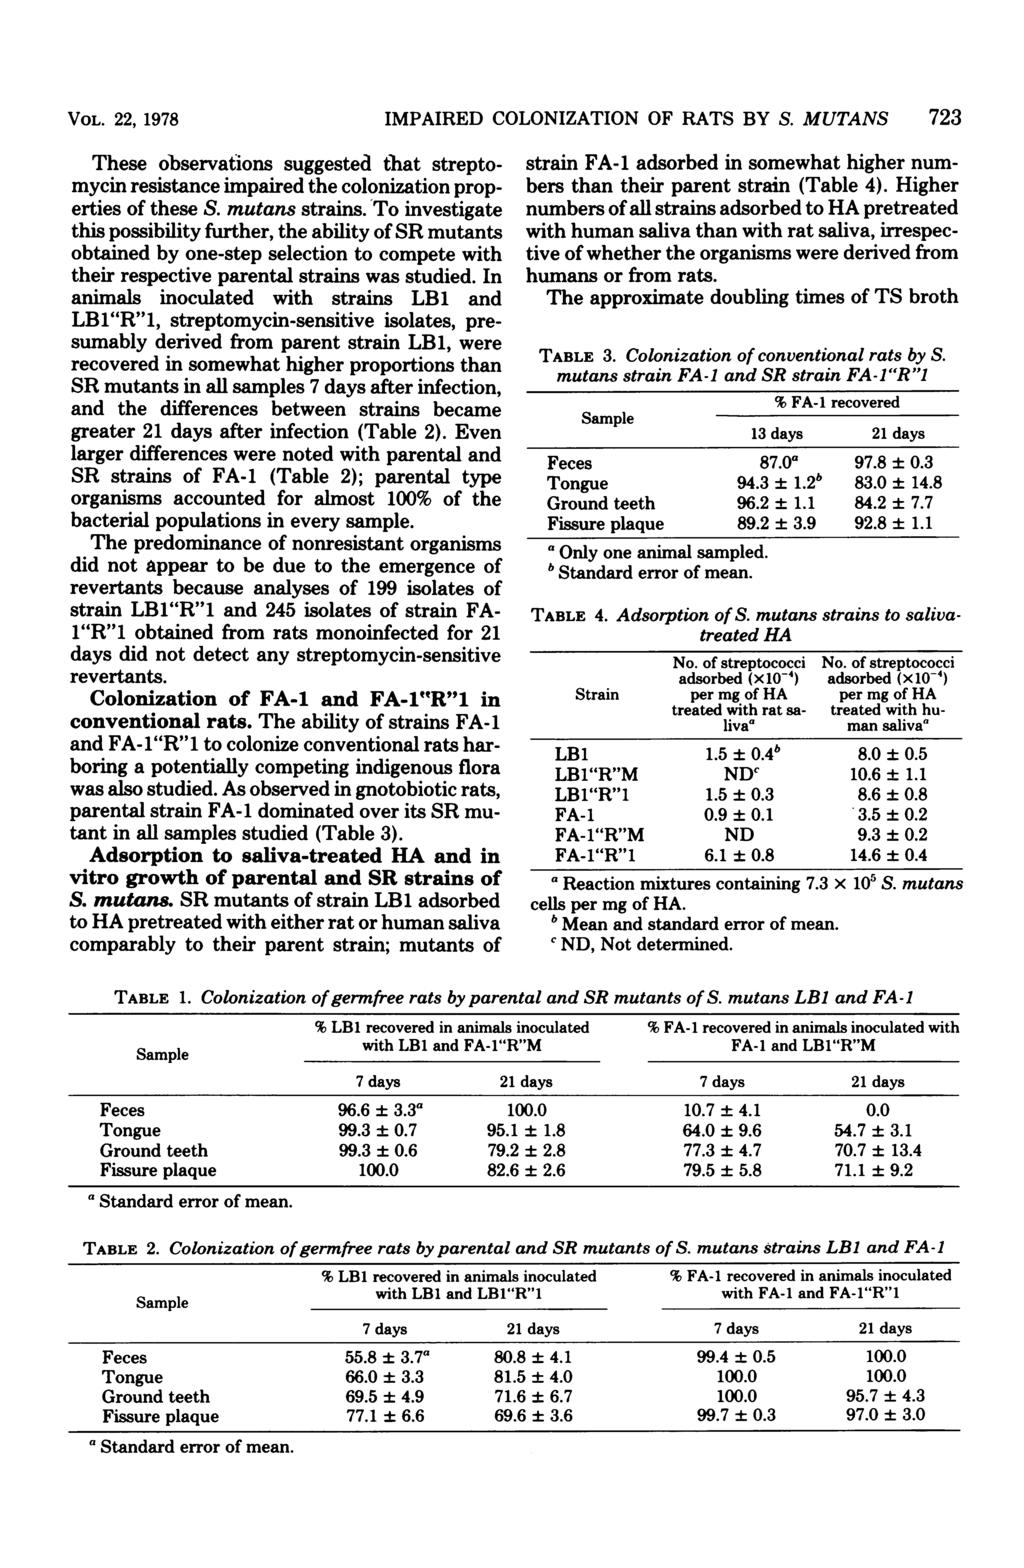 VOL. 22, 1978 These observations suggested that streptomycin resistance impaired the colonization properties of these S. mutans strains.